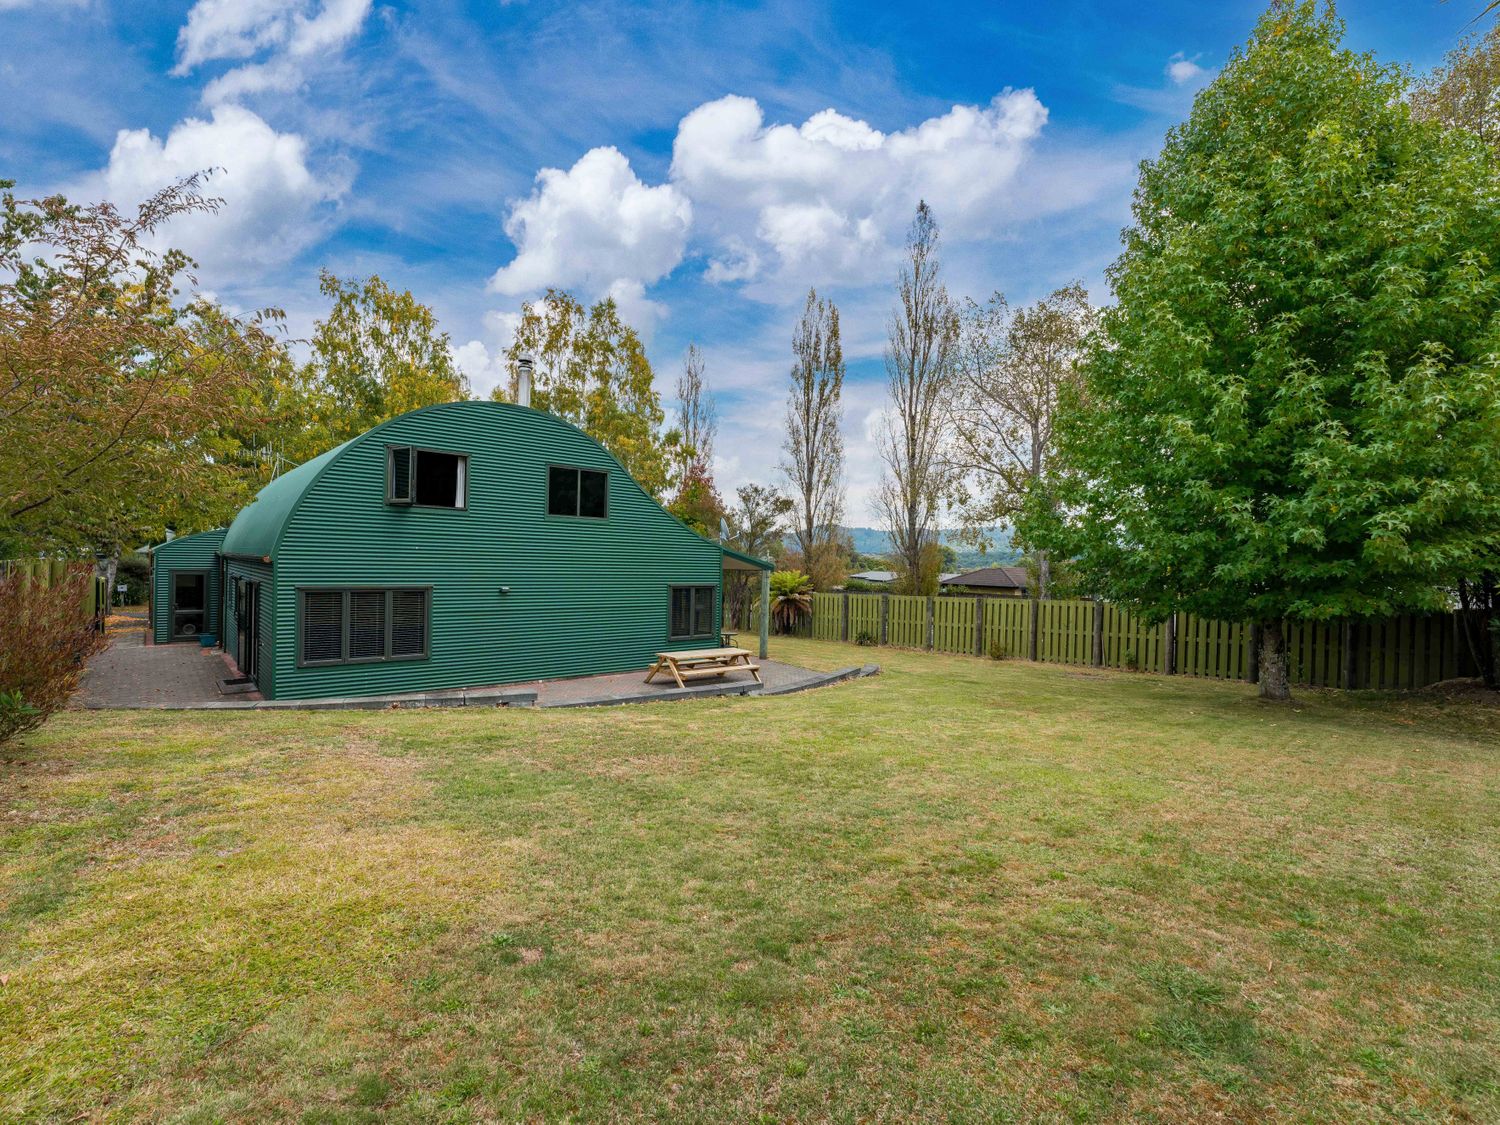 Modern Barn Style - Taupo Holiday Home -  - 1155134 - photo 1